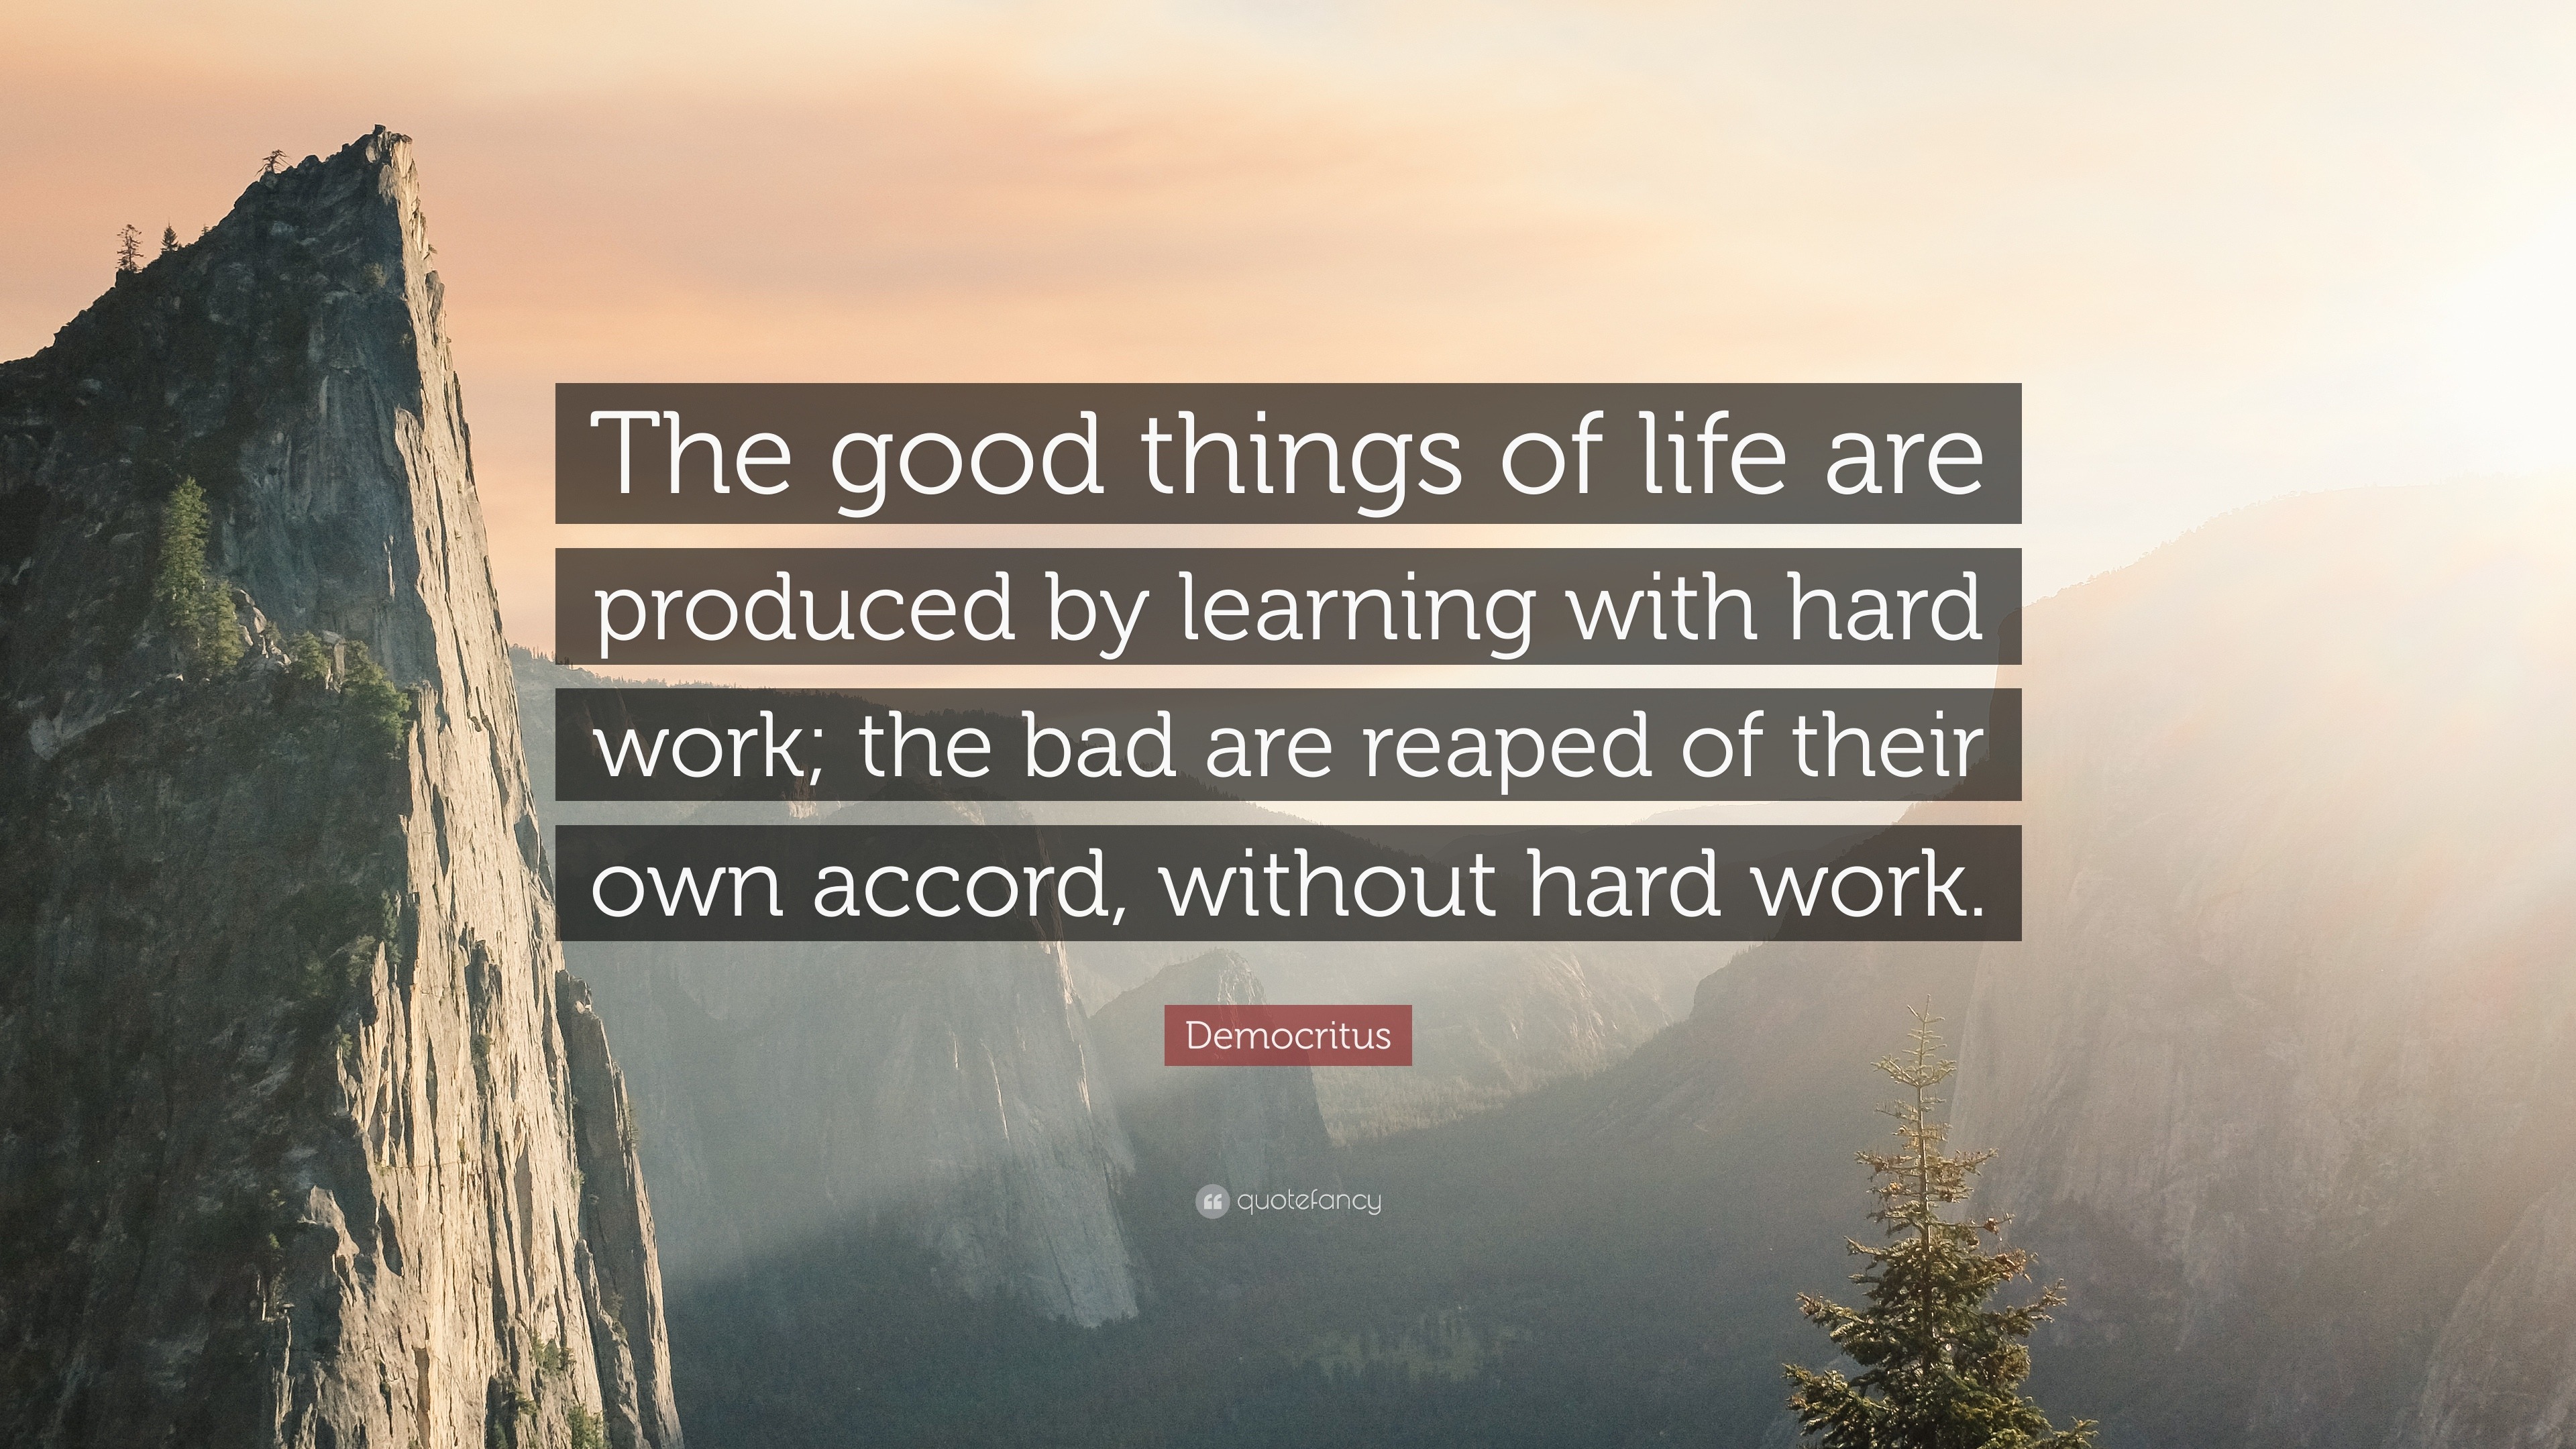 Democritus Quote “The good things of life are produced by learning with hard work